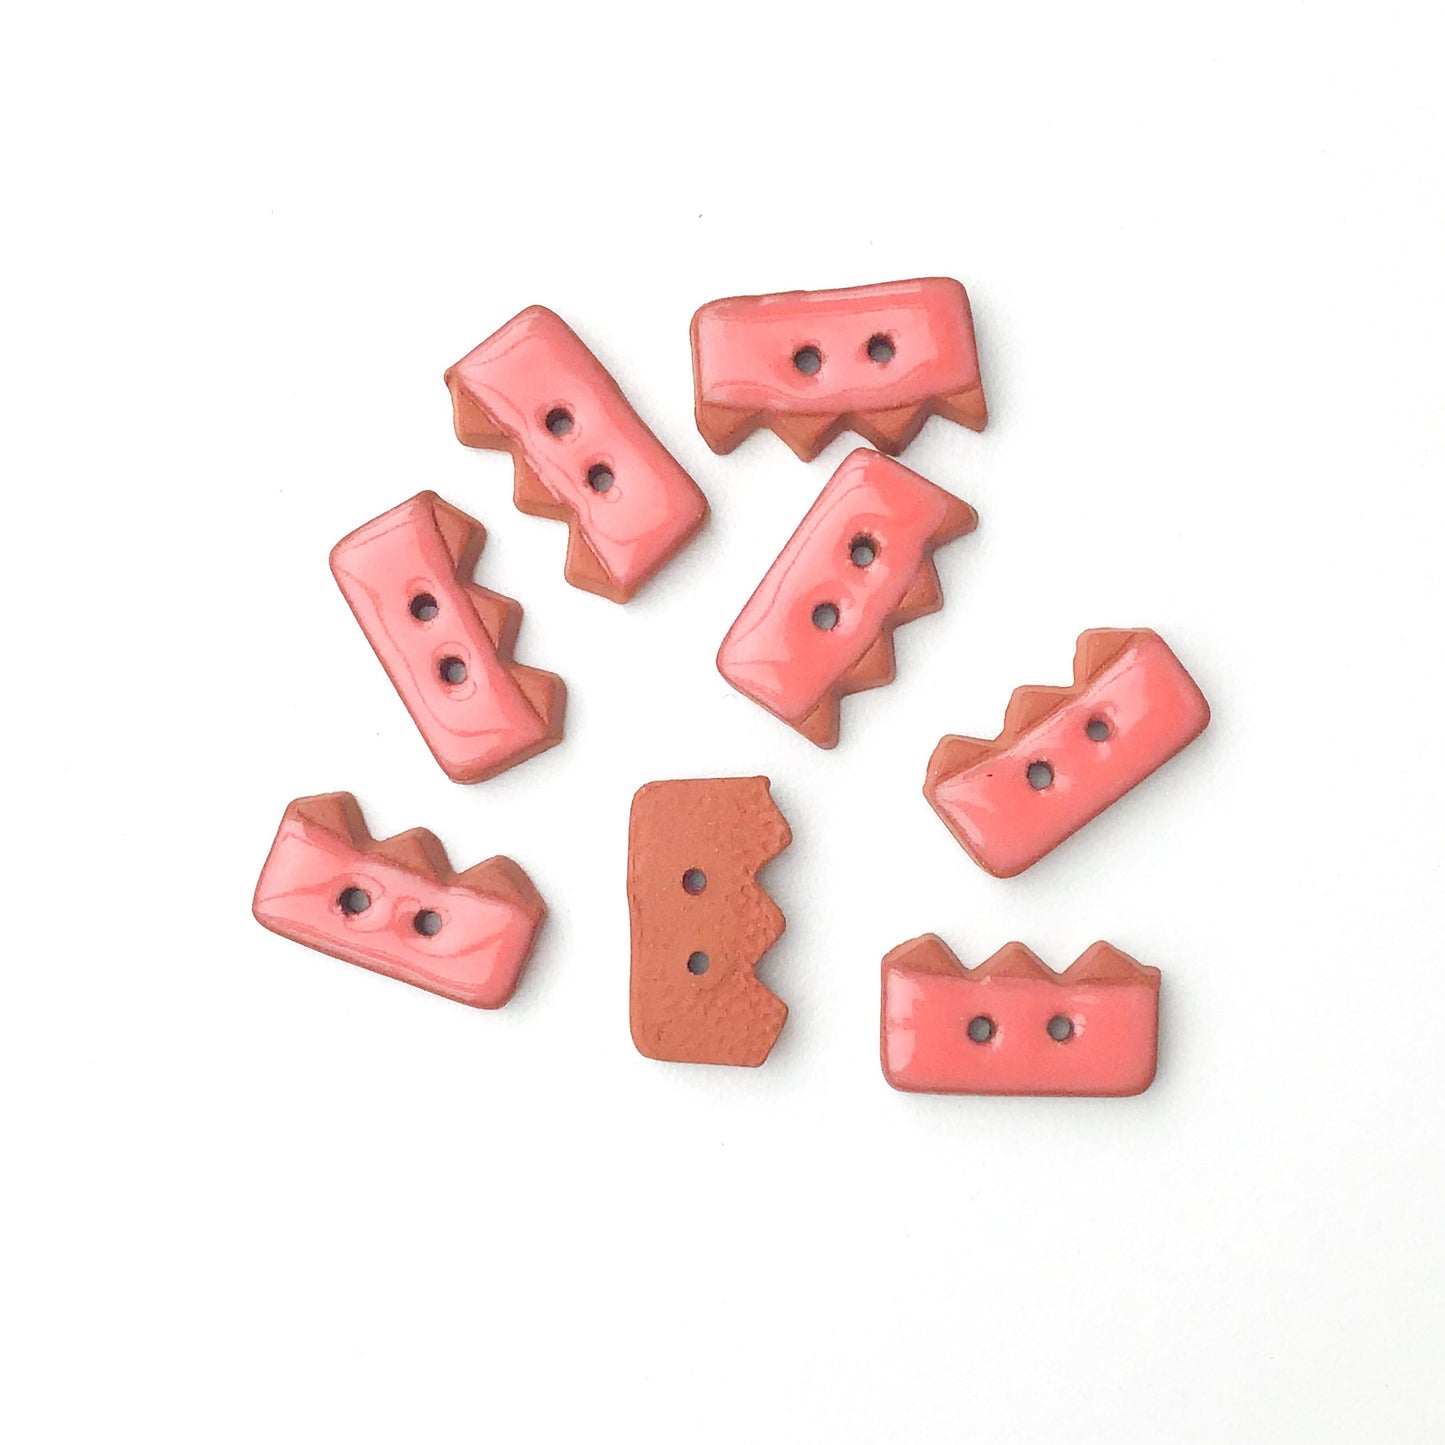 Salmon Colored Buttons on Red Clay - Ceramic Buttons - 3/8" x 3/4" - 8 Pack